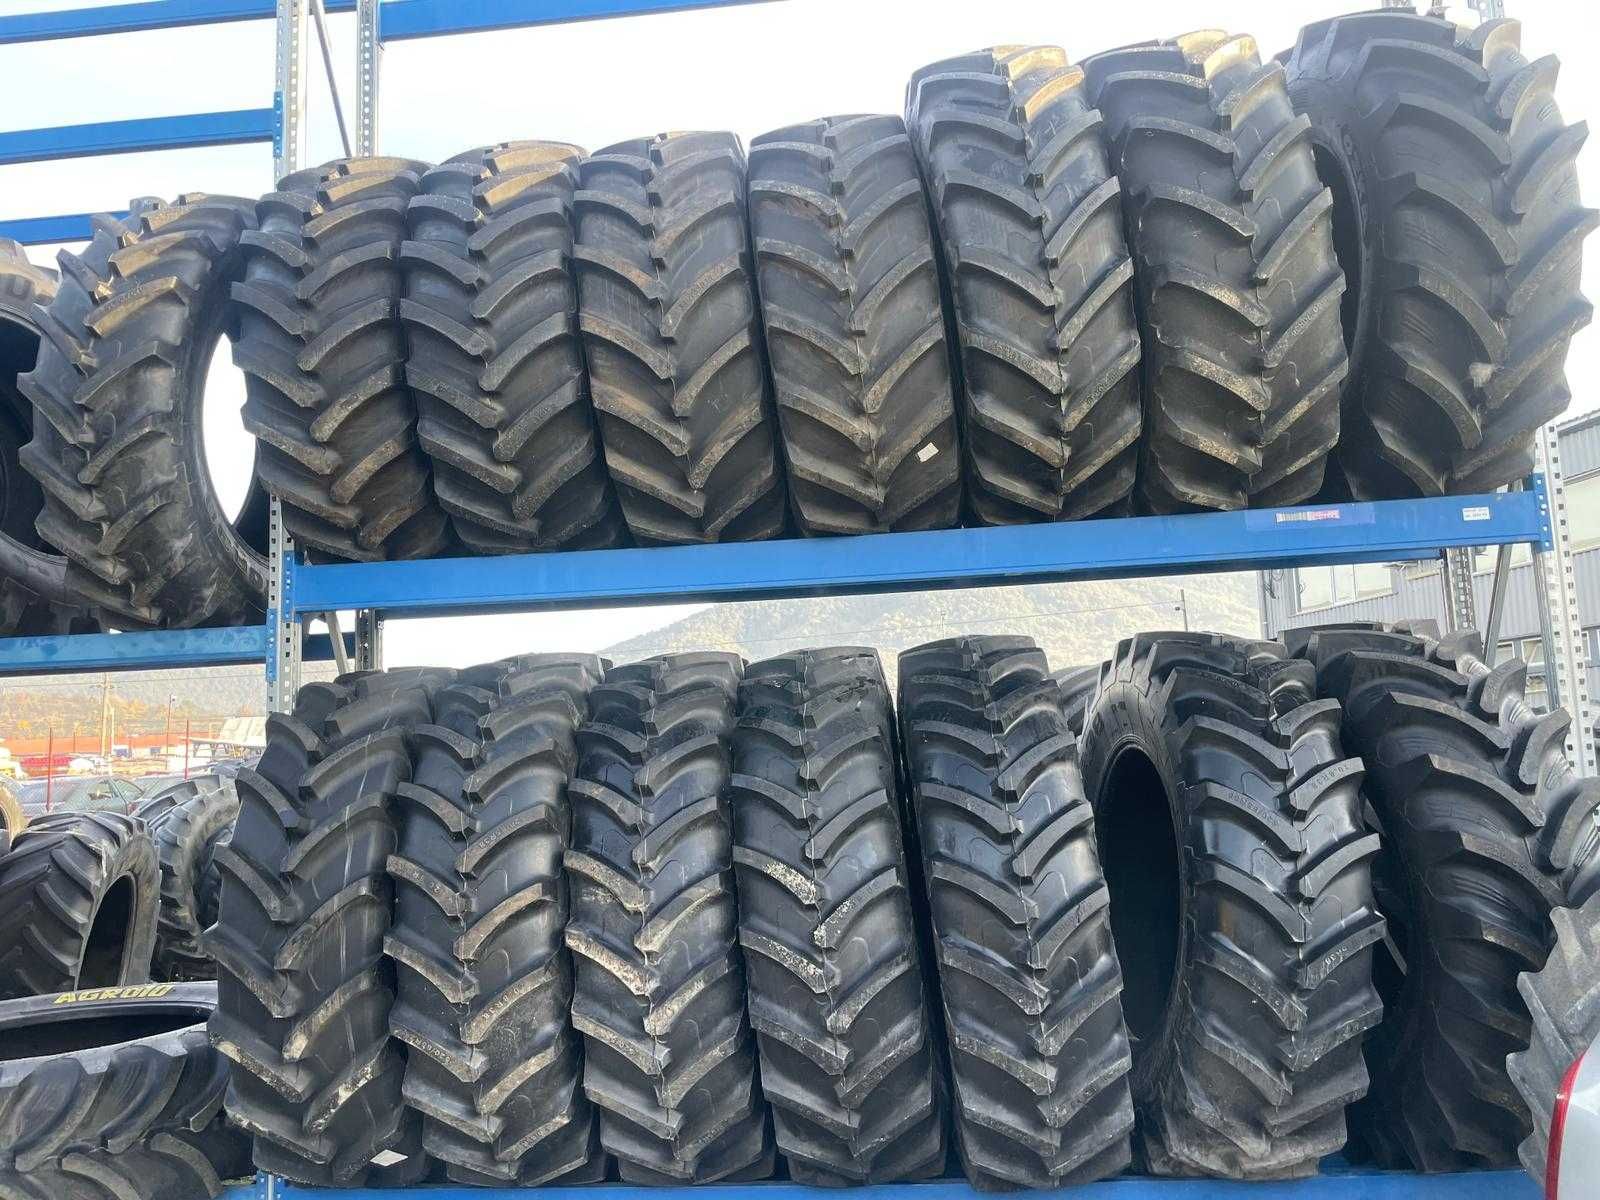 Anvelope radiale 520/85R38 ARMOUR anvelope noi 20.8R38 155A8